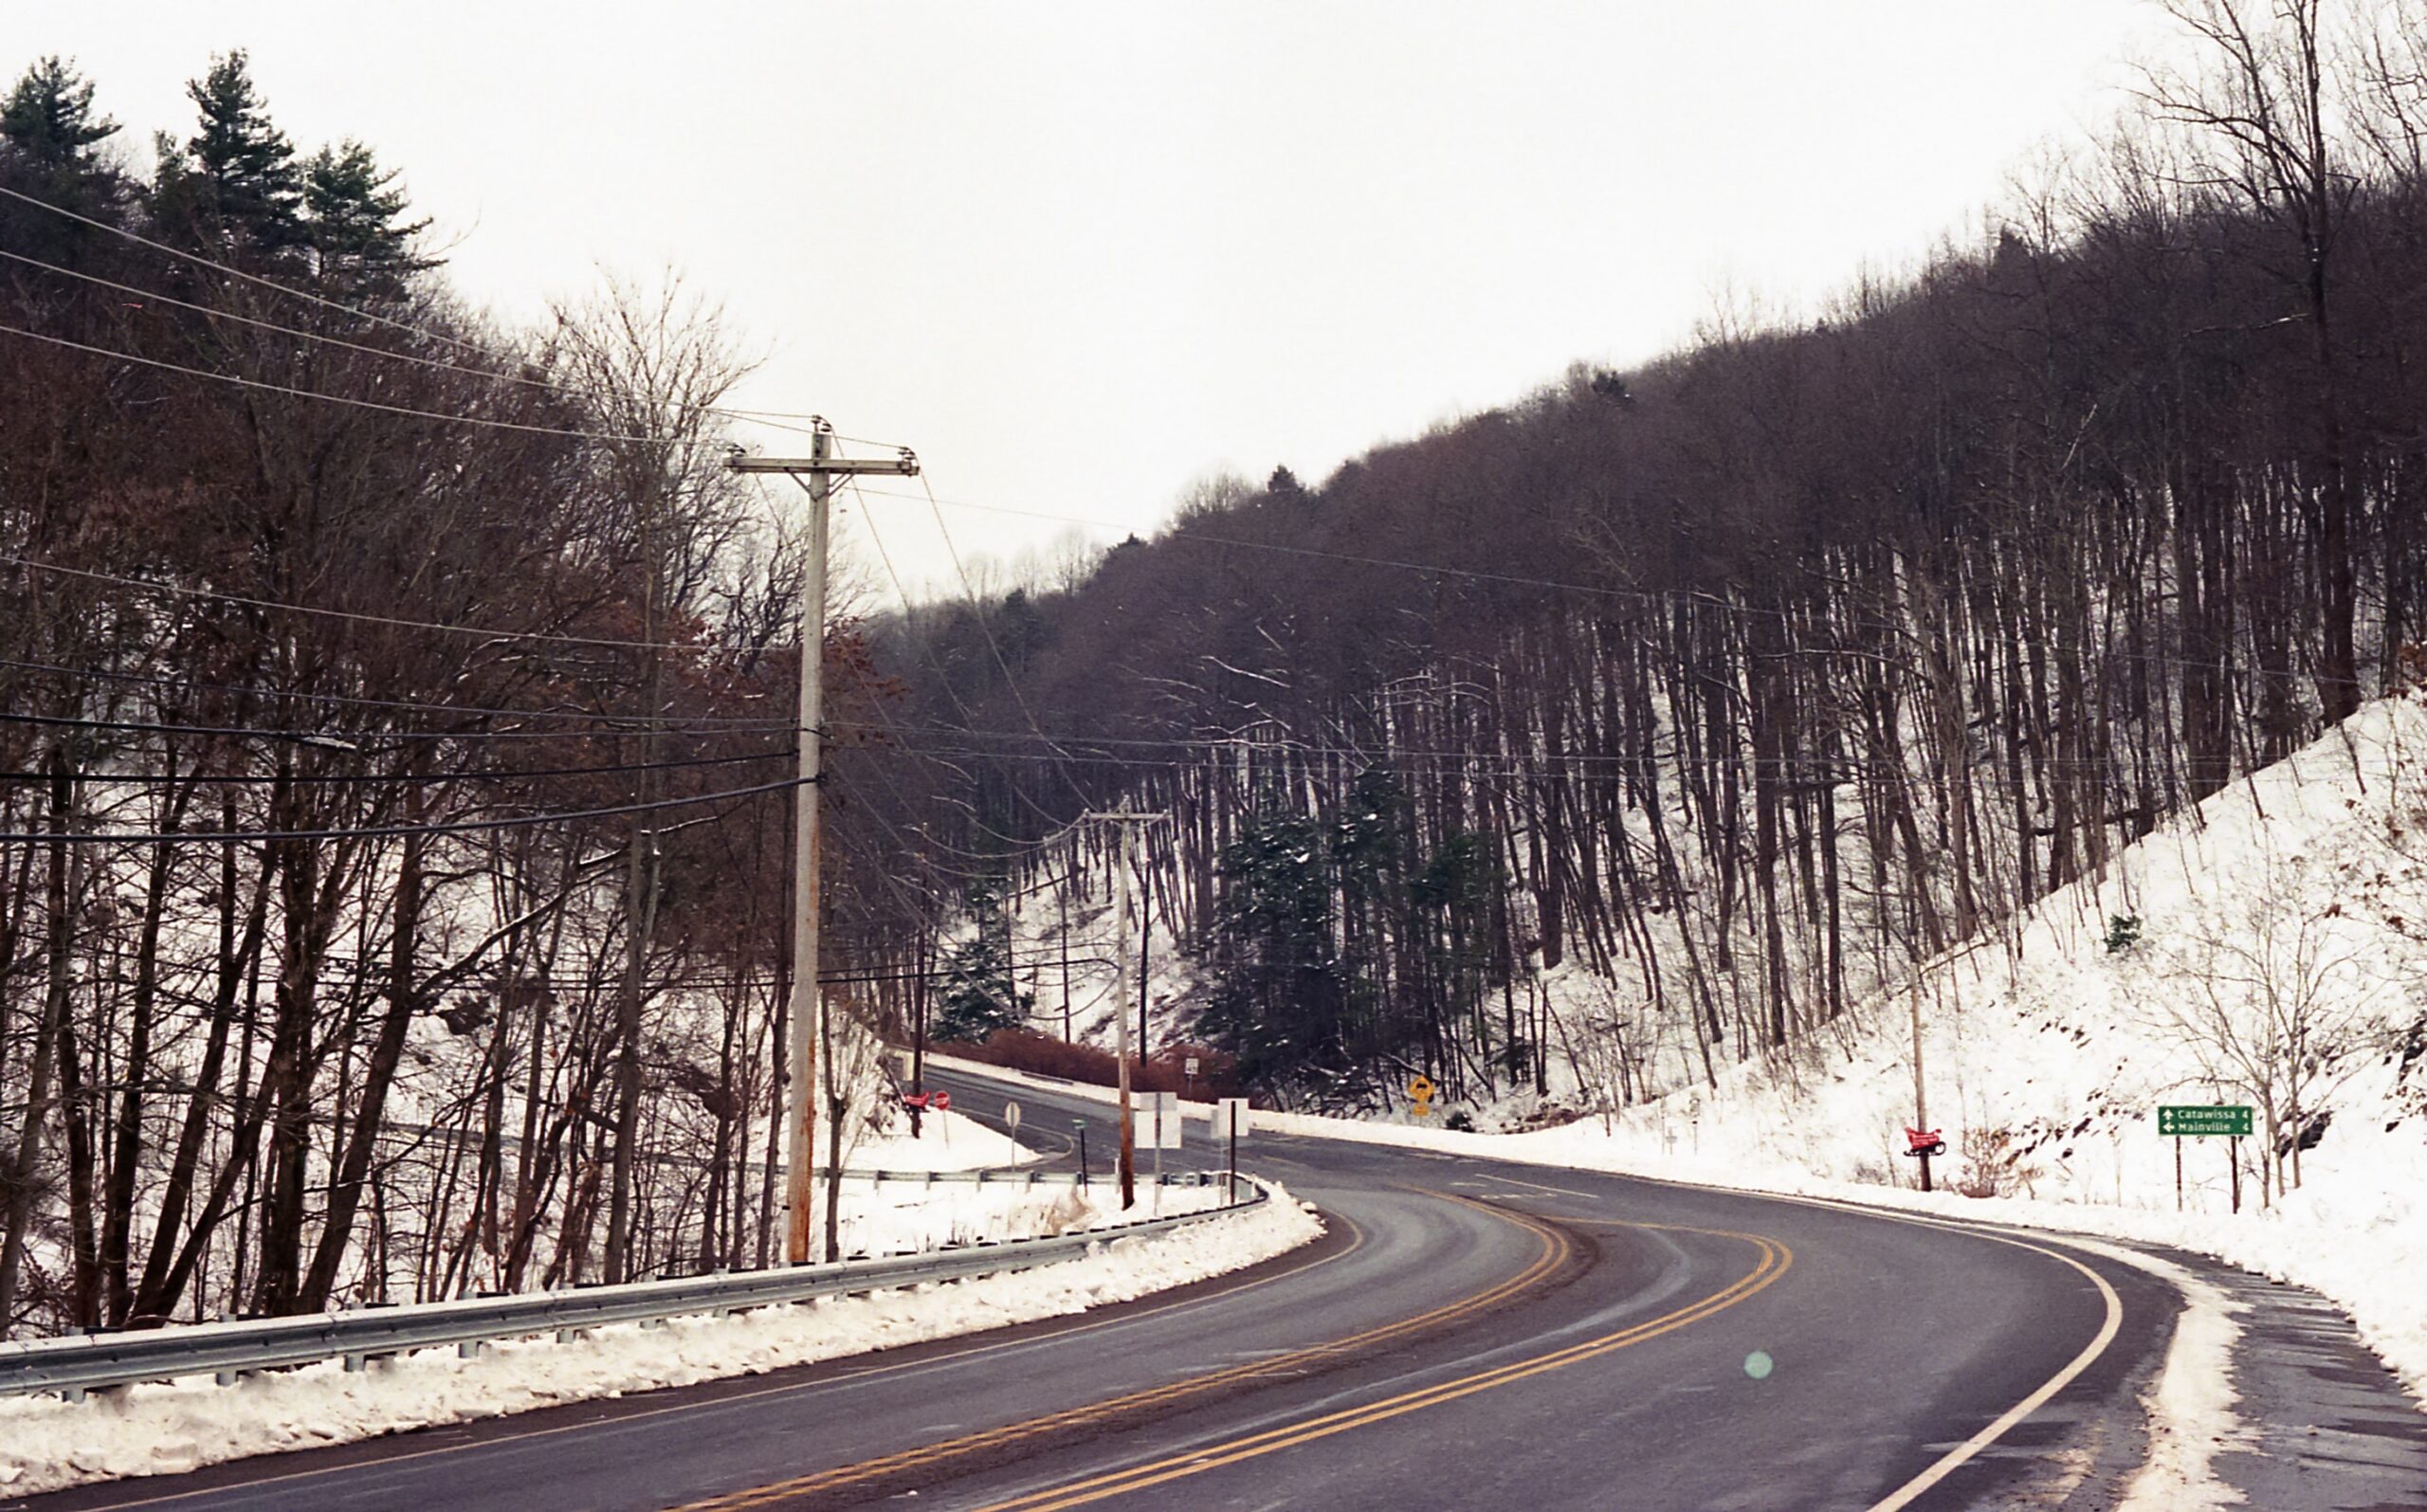 The United States has many destinations which would be ideal for a winter holiday.
Pictured: a snowy winding road in Pennsylvania during the winter 